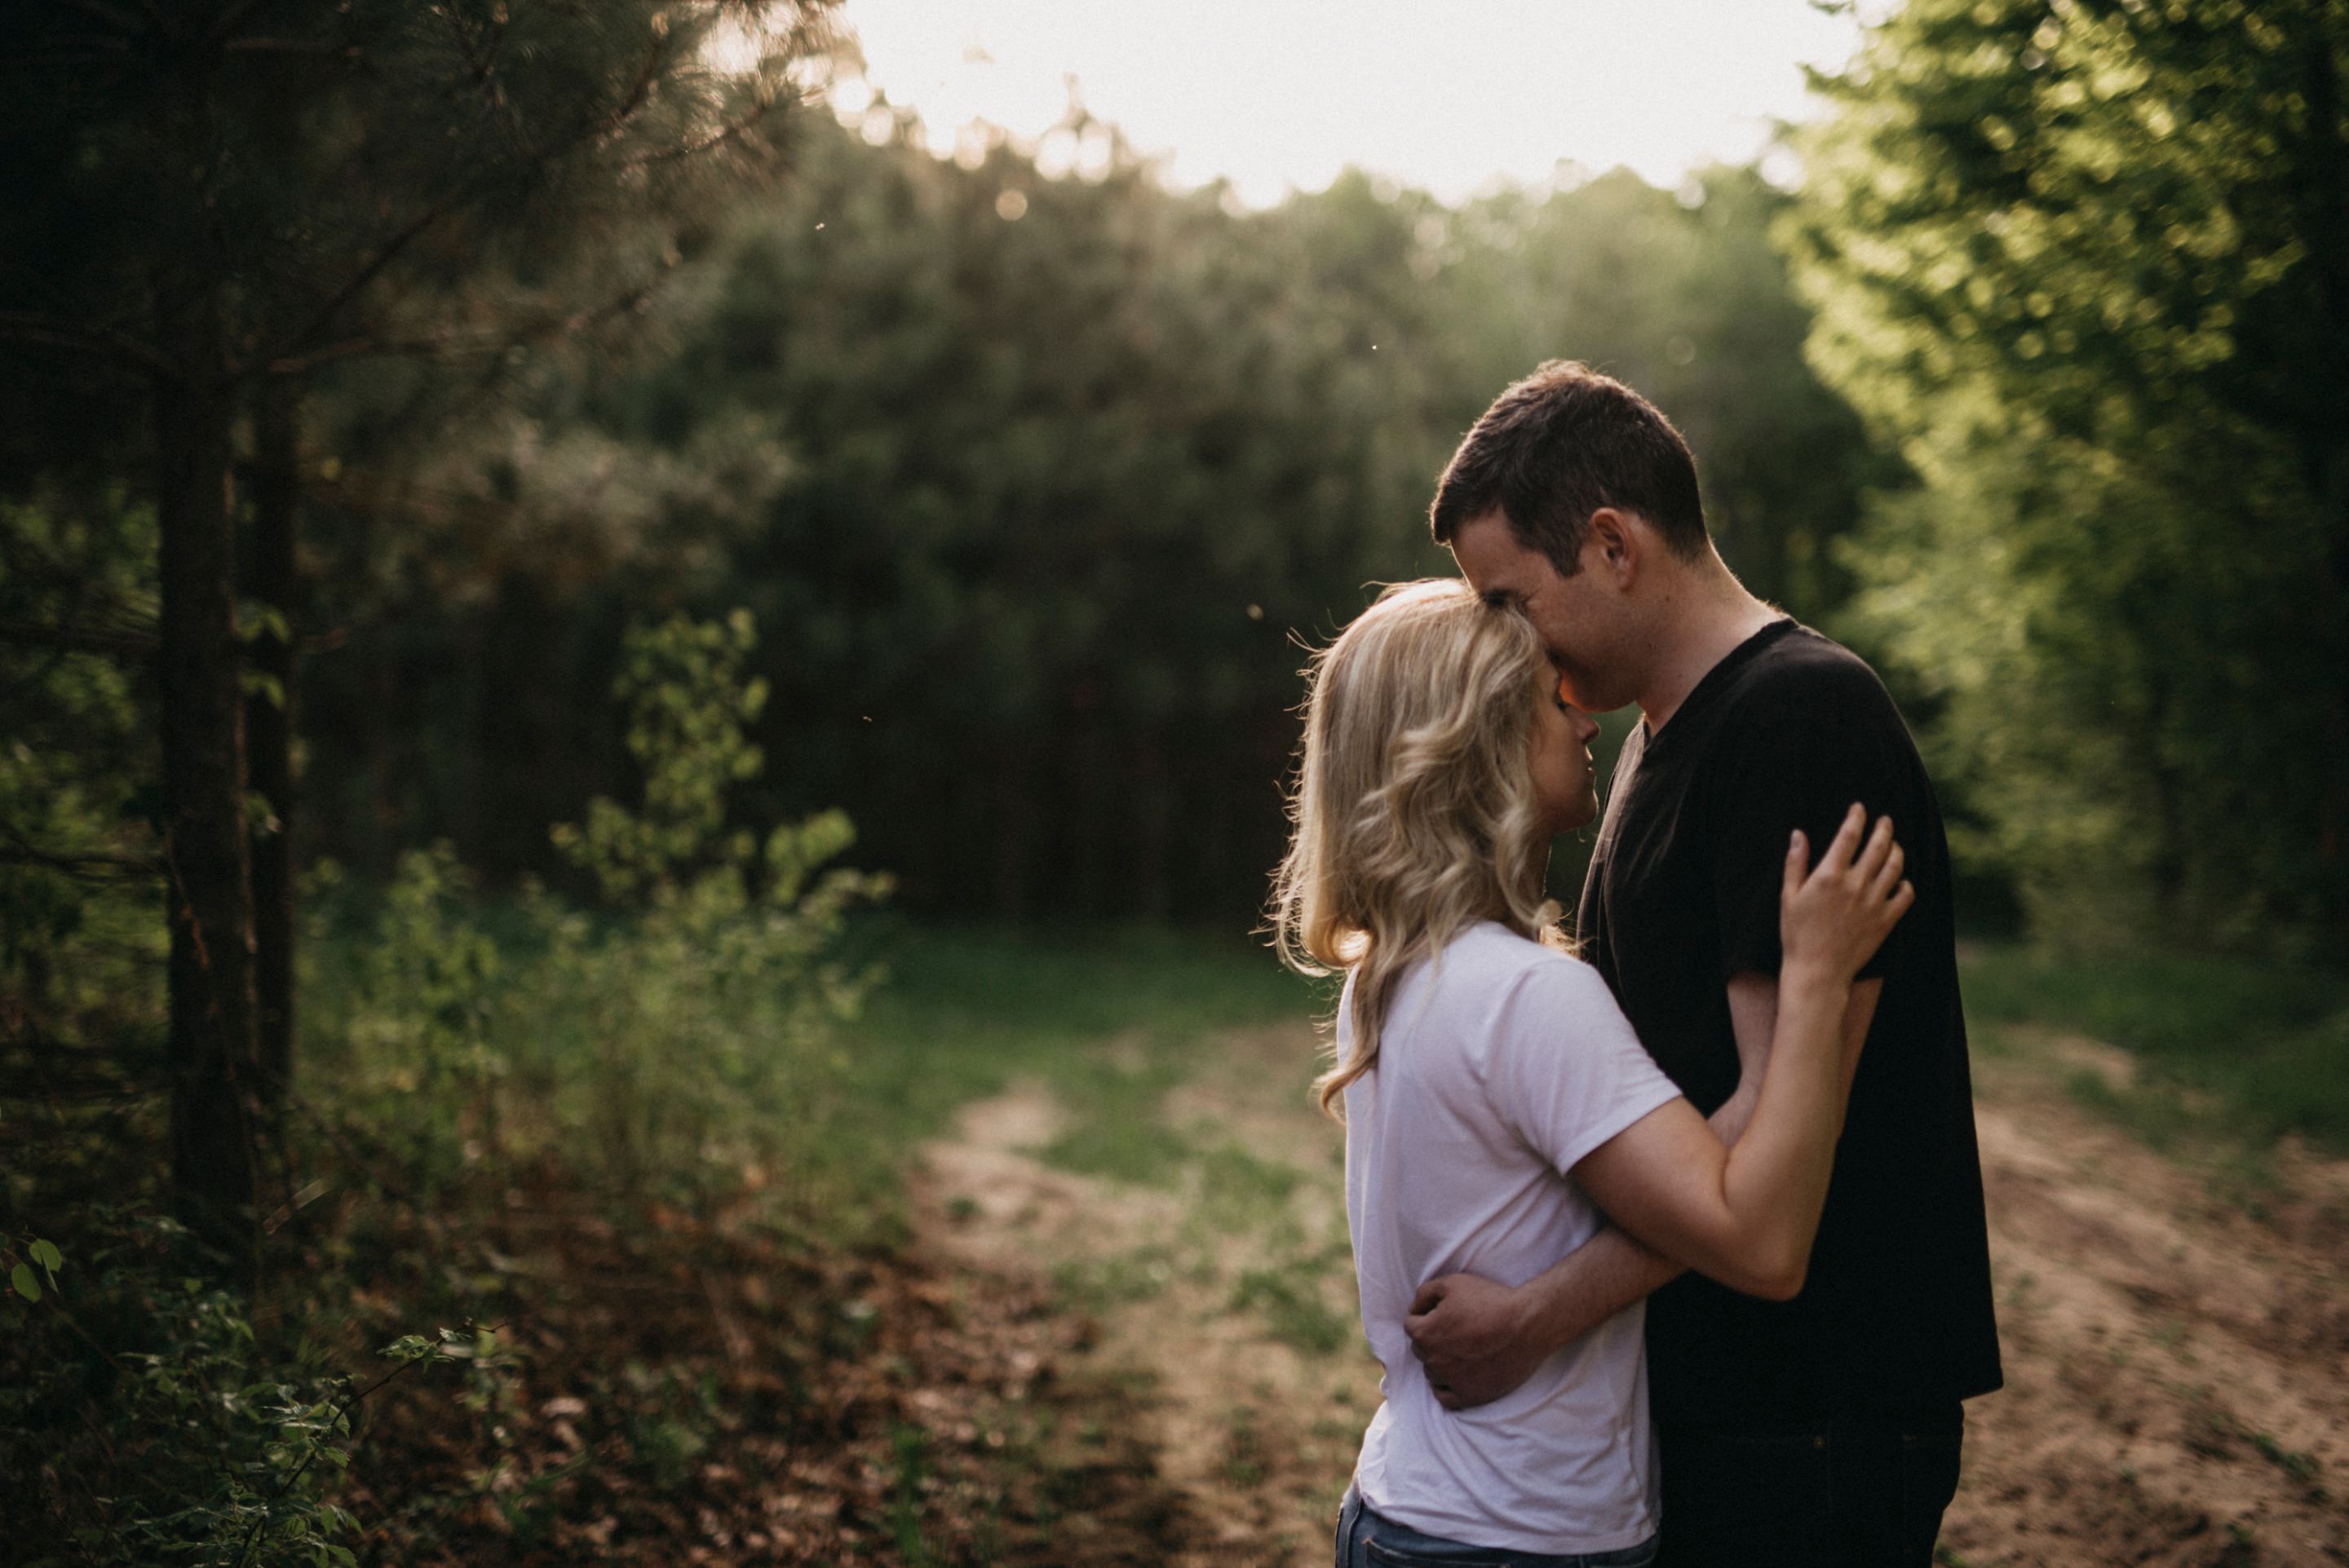 Shaw Woods Adventure Engagement Session - Cindy Lottes Photography